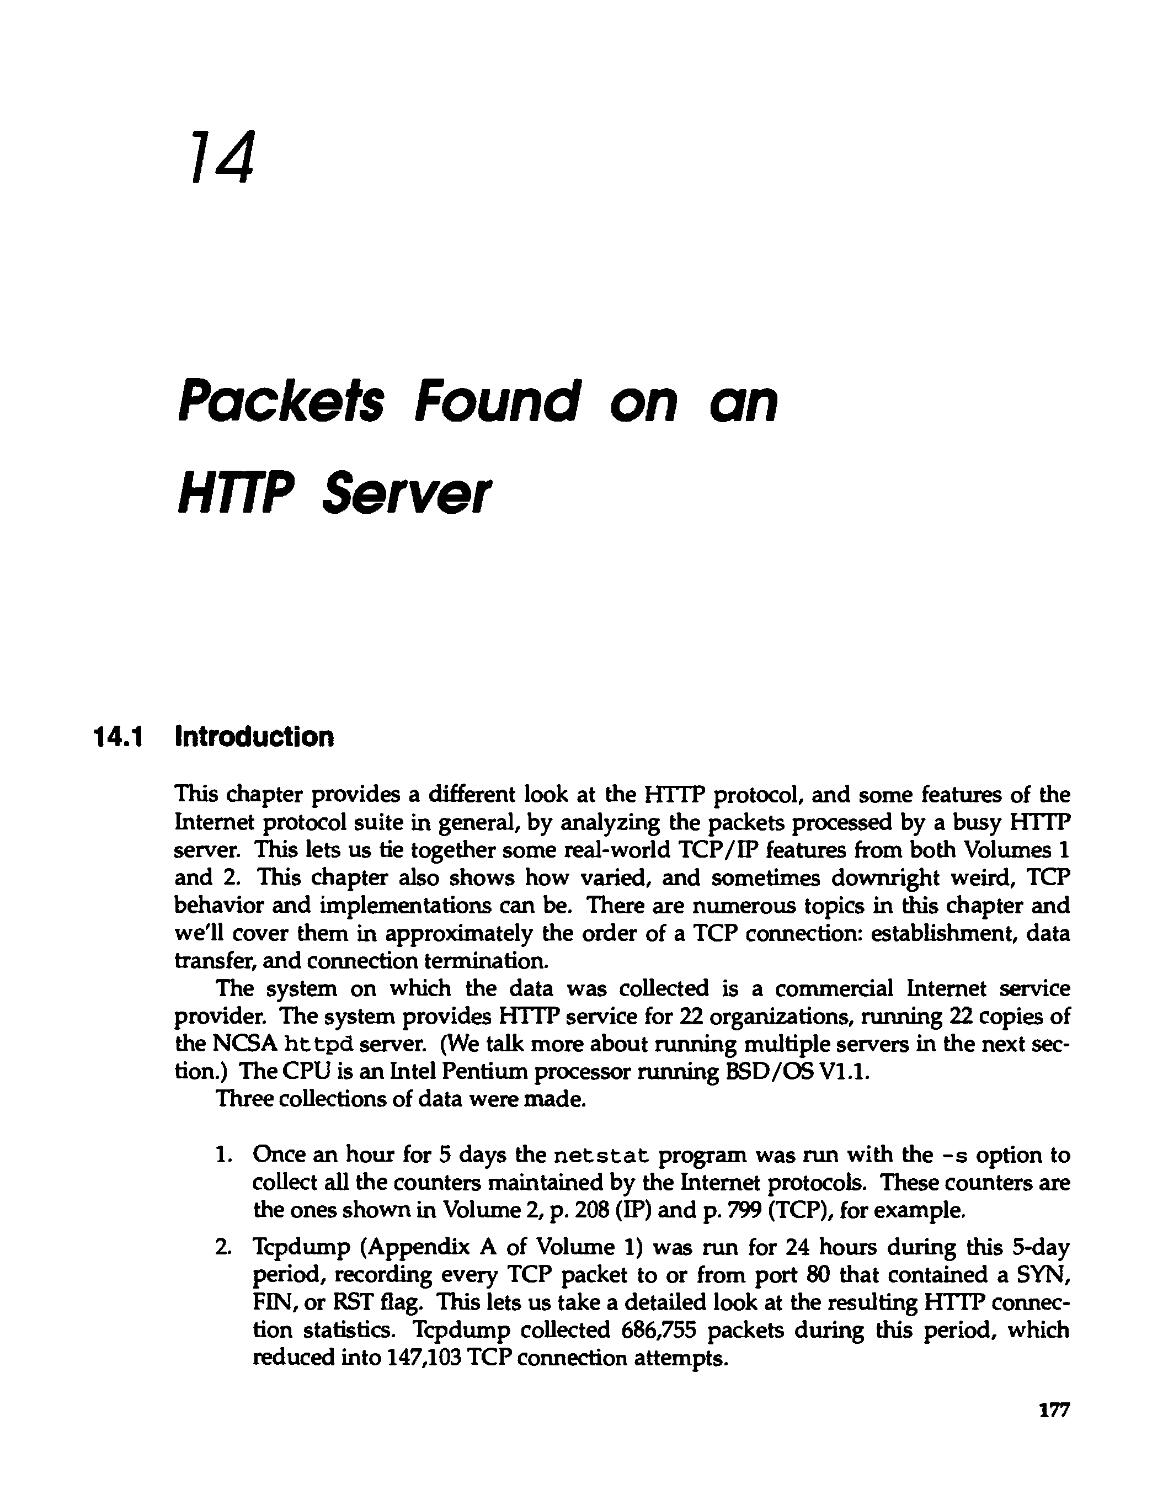 Chapter 14. Packets Found on an HTTP Server